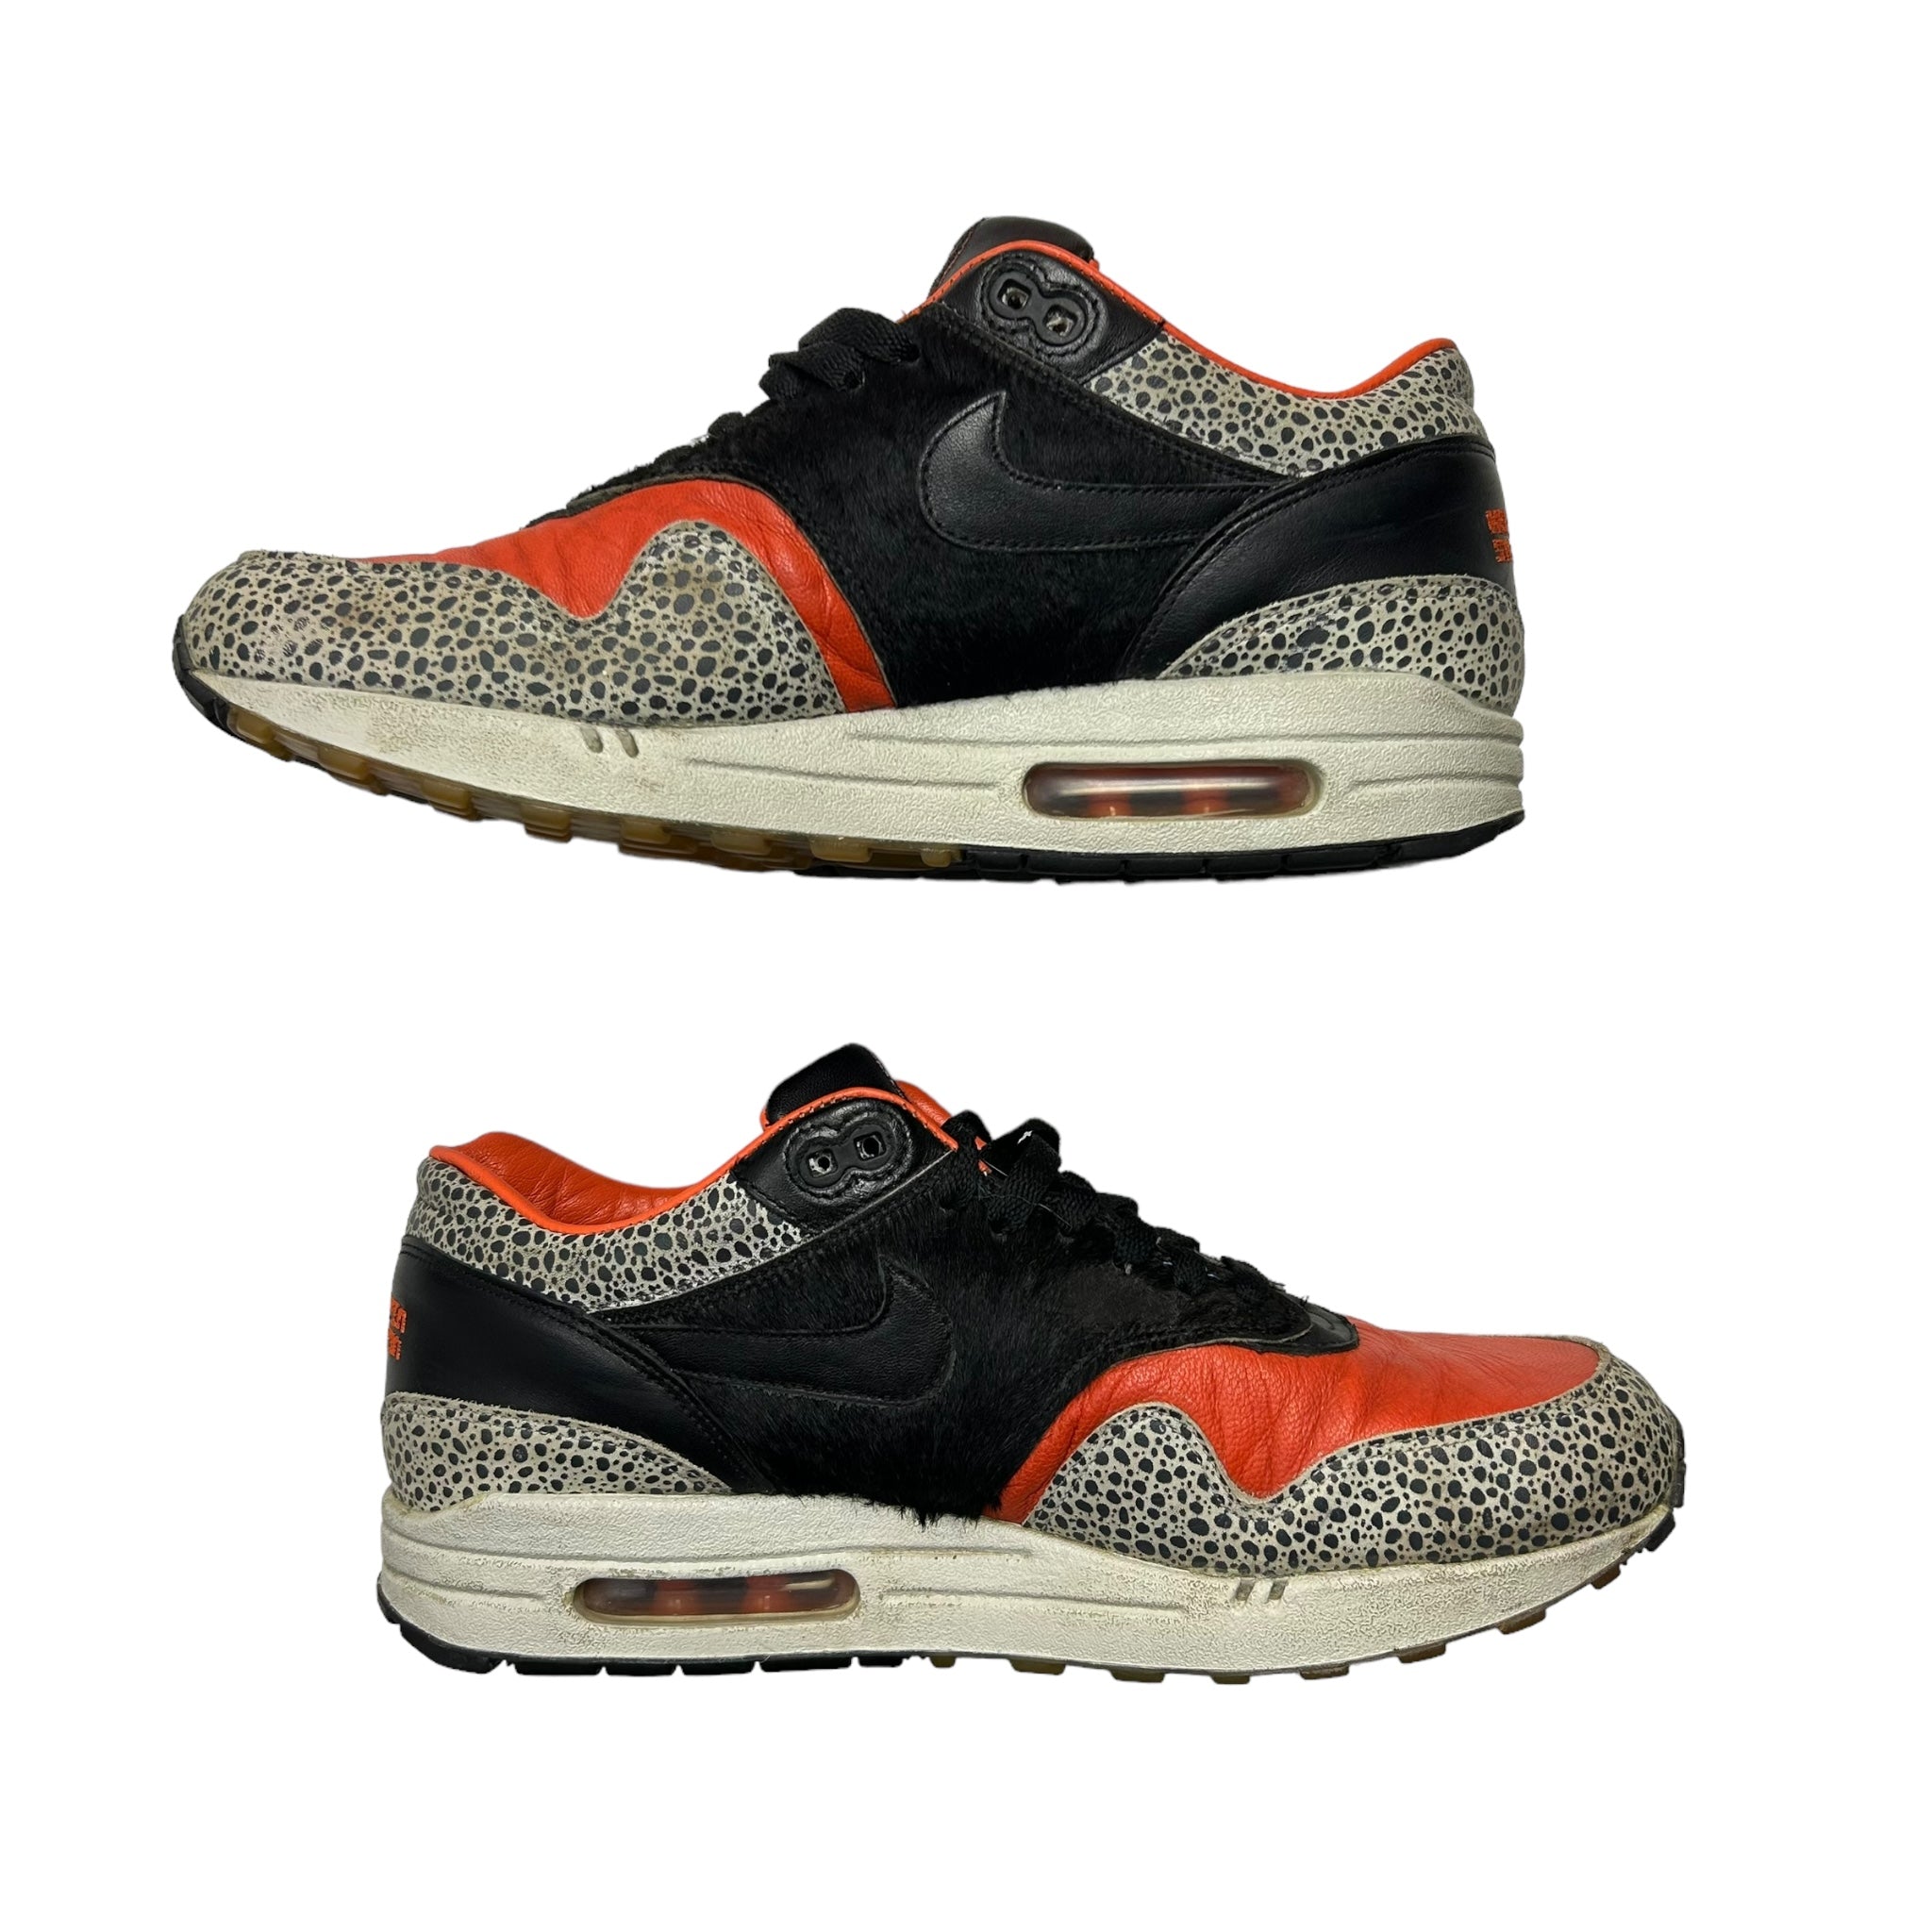 2008 Nike AirMax 1 Keep Ripping Stop Slippin (Used)